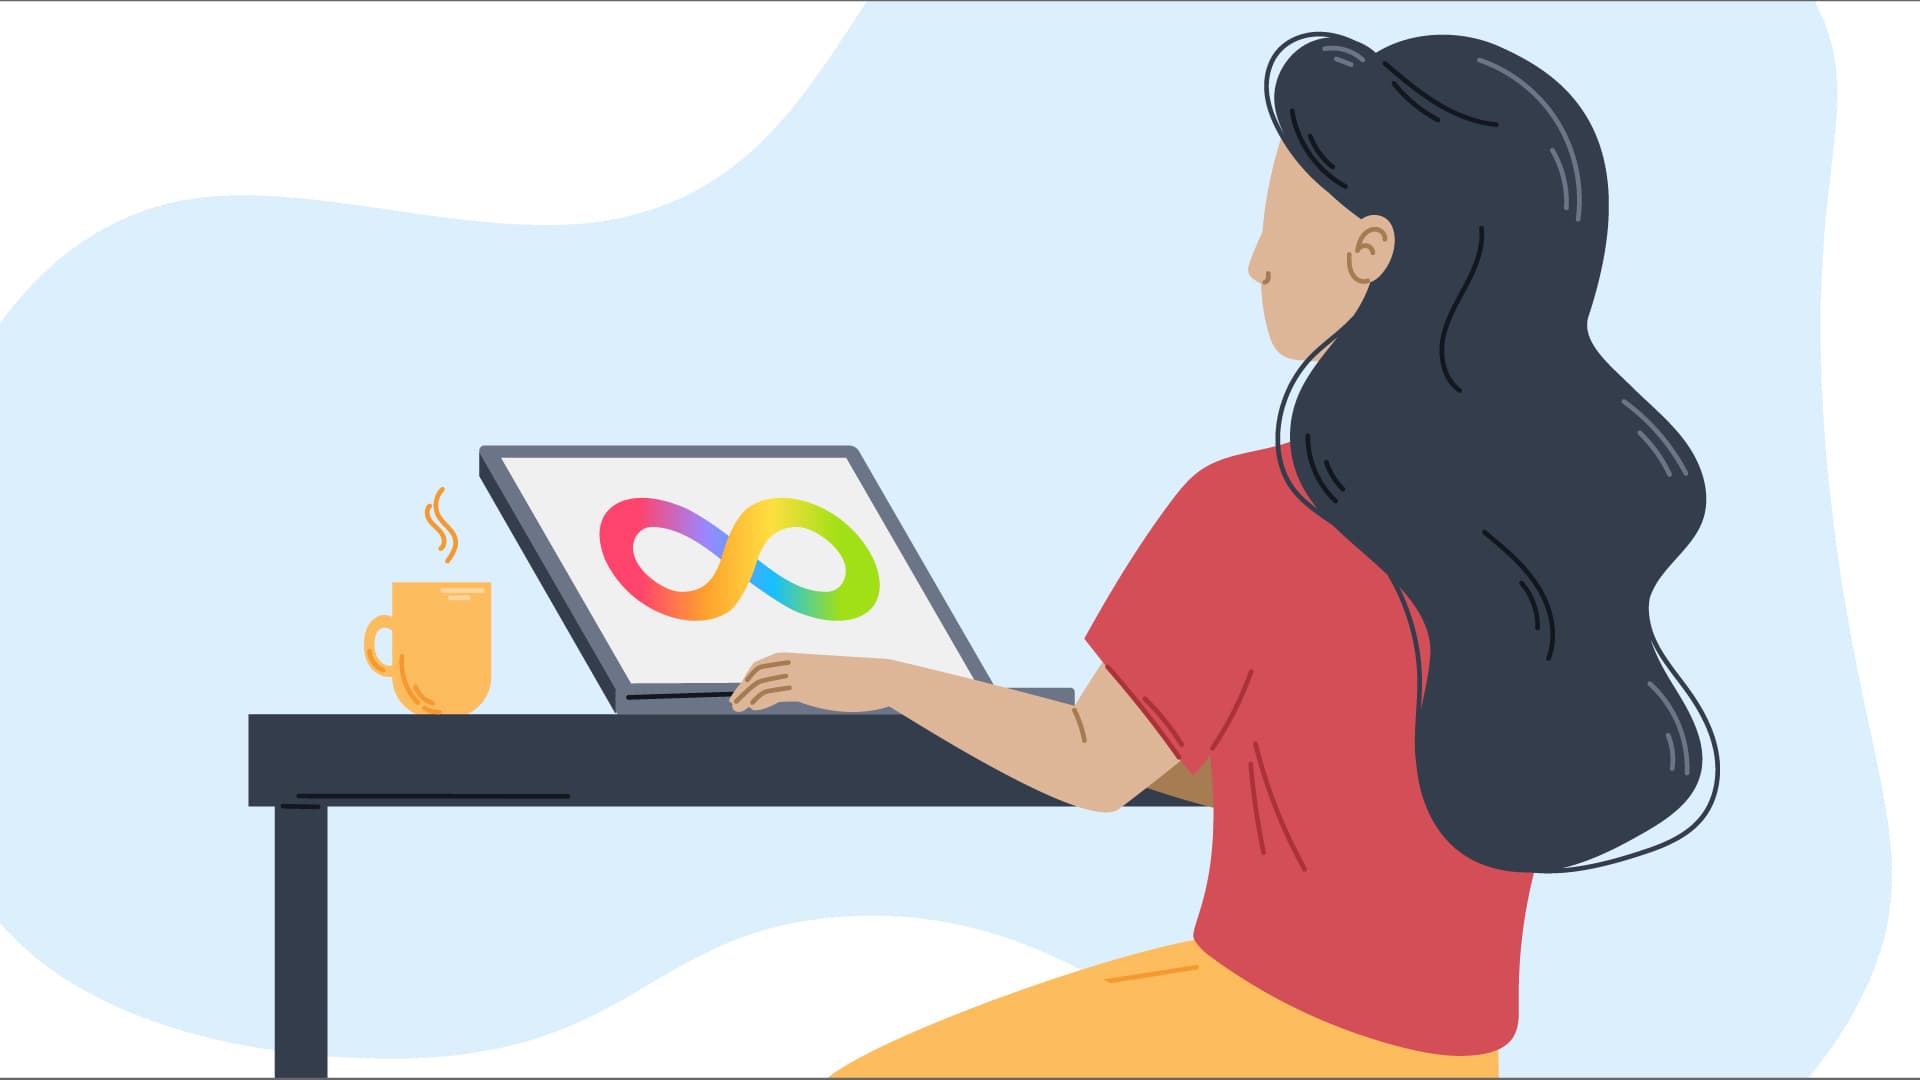 illustration of woman sitting in front of a laptop with a symbol for neurodiversity